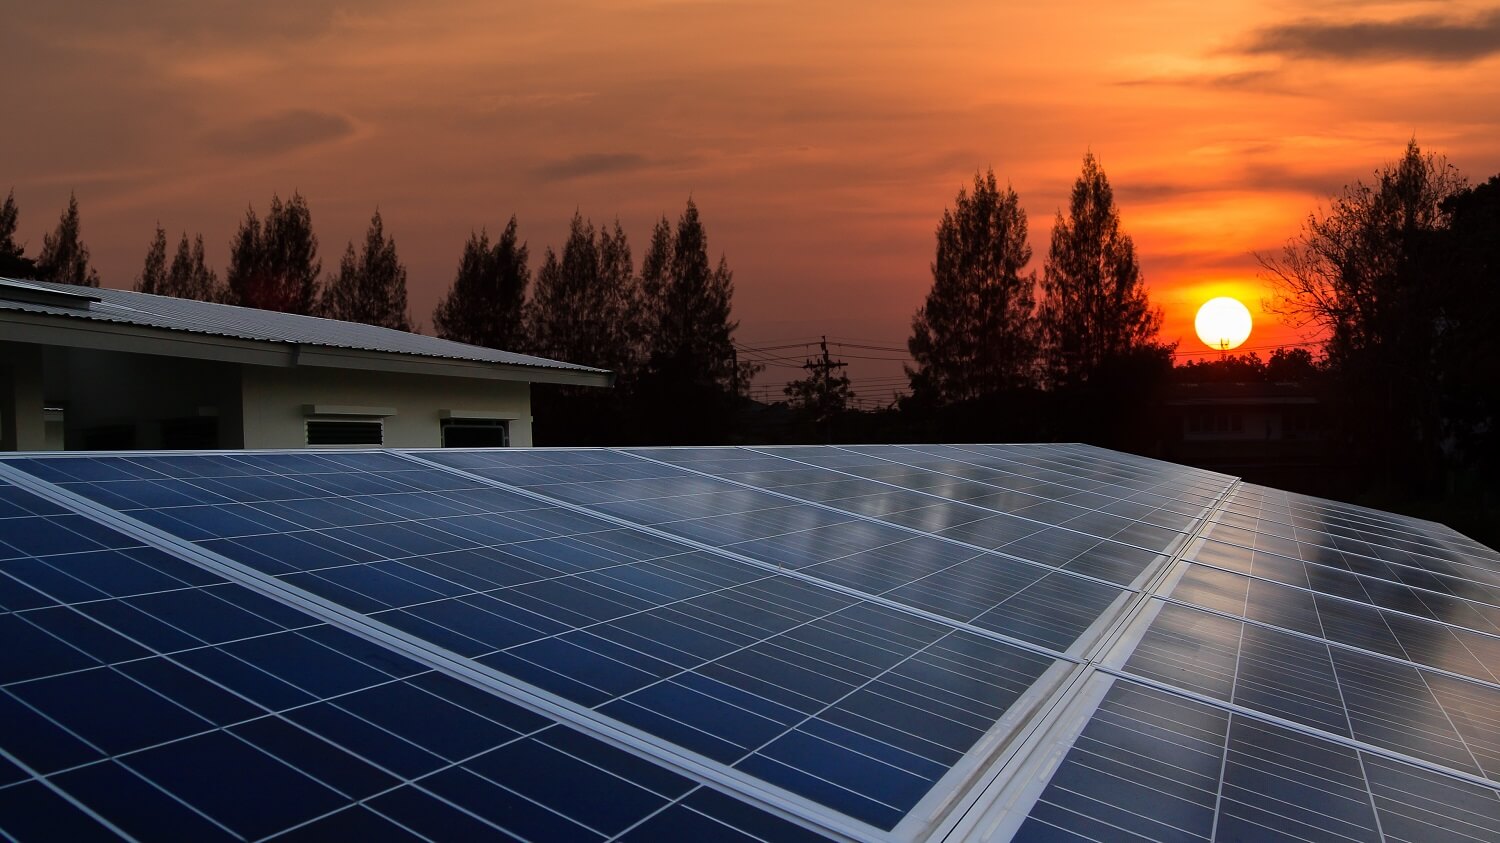 Home Solar panel installation services by a leading company